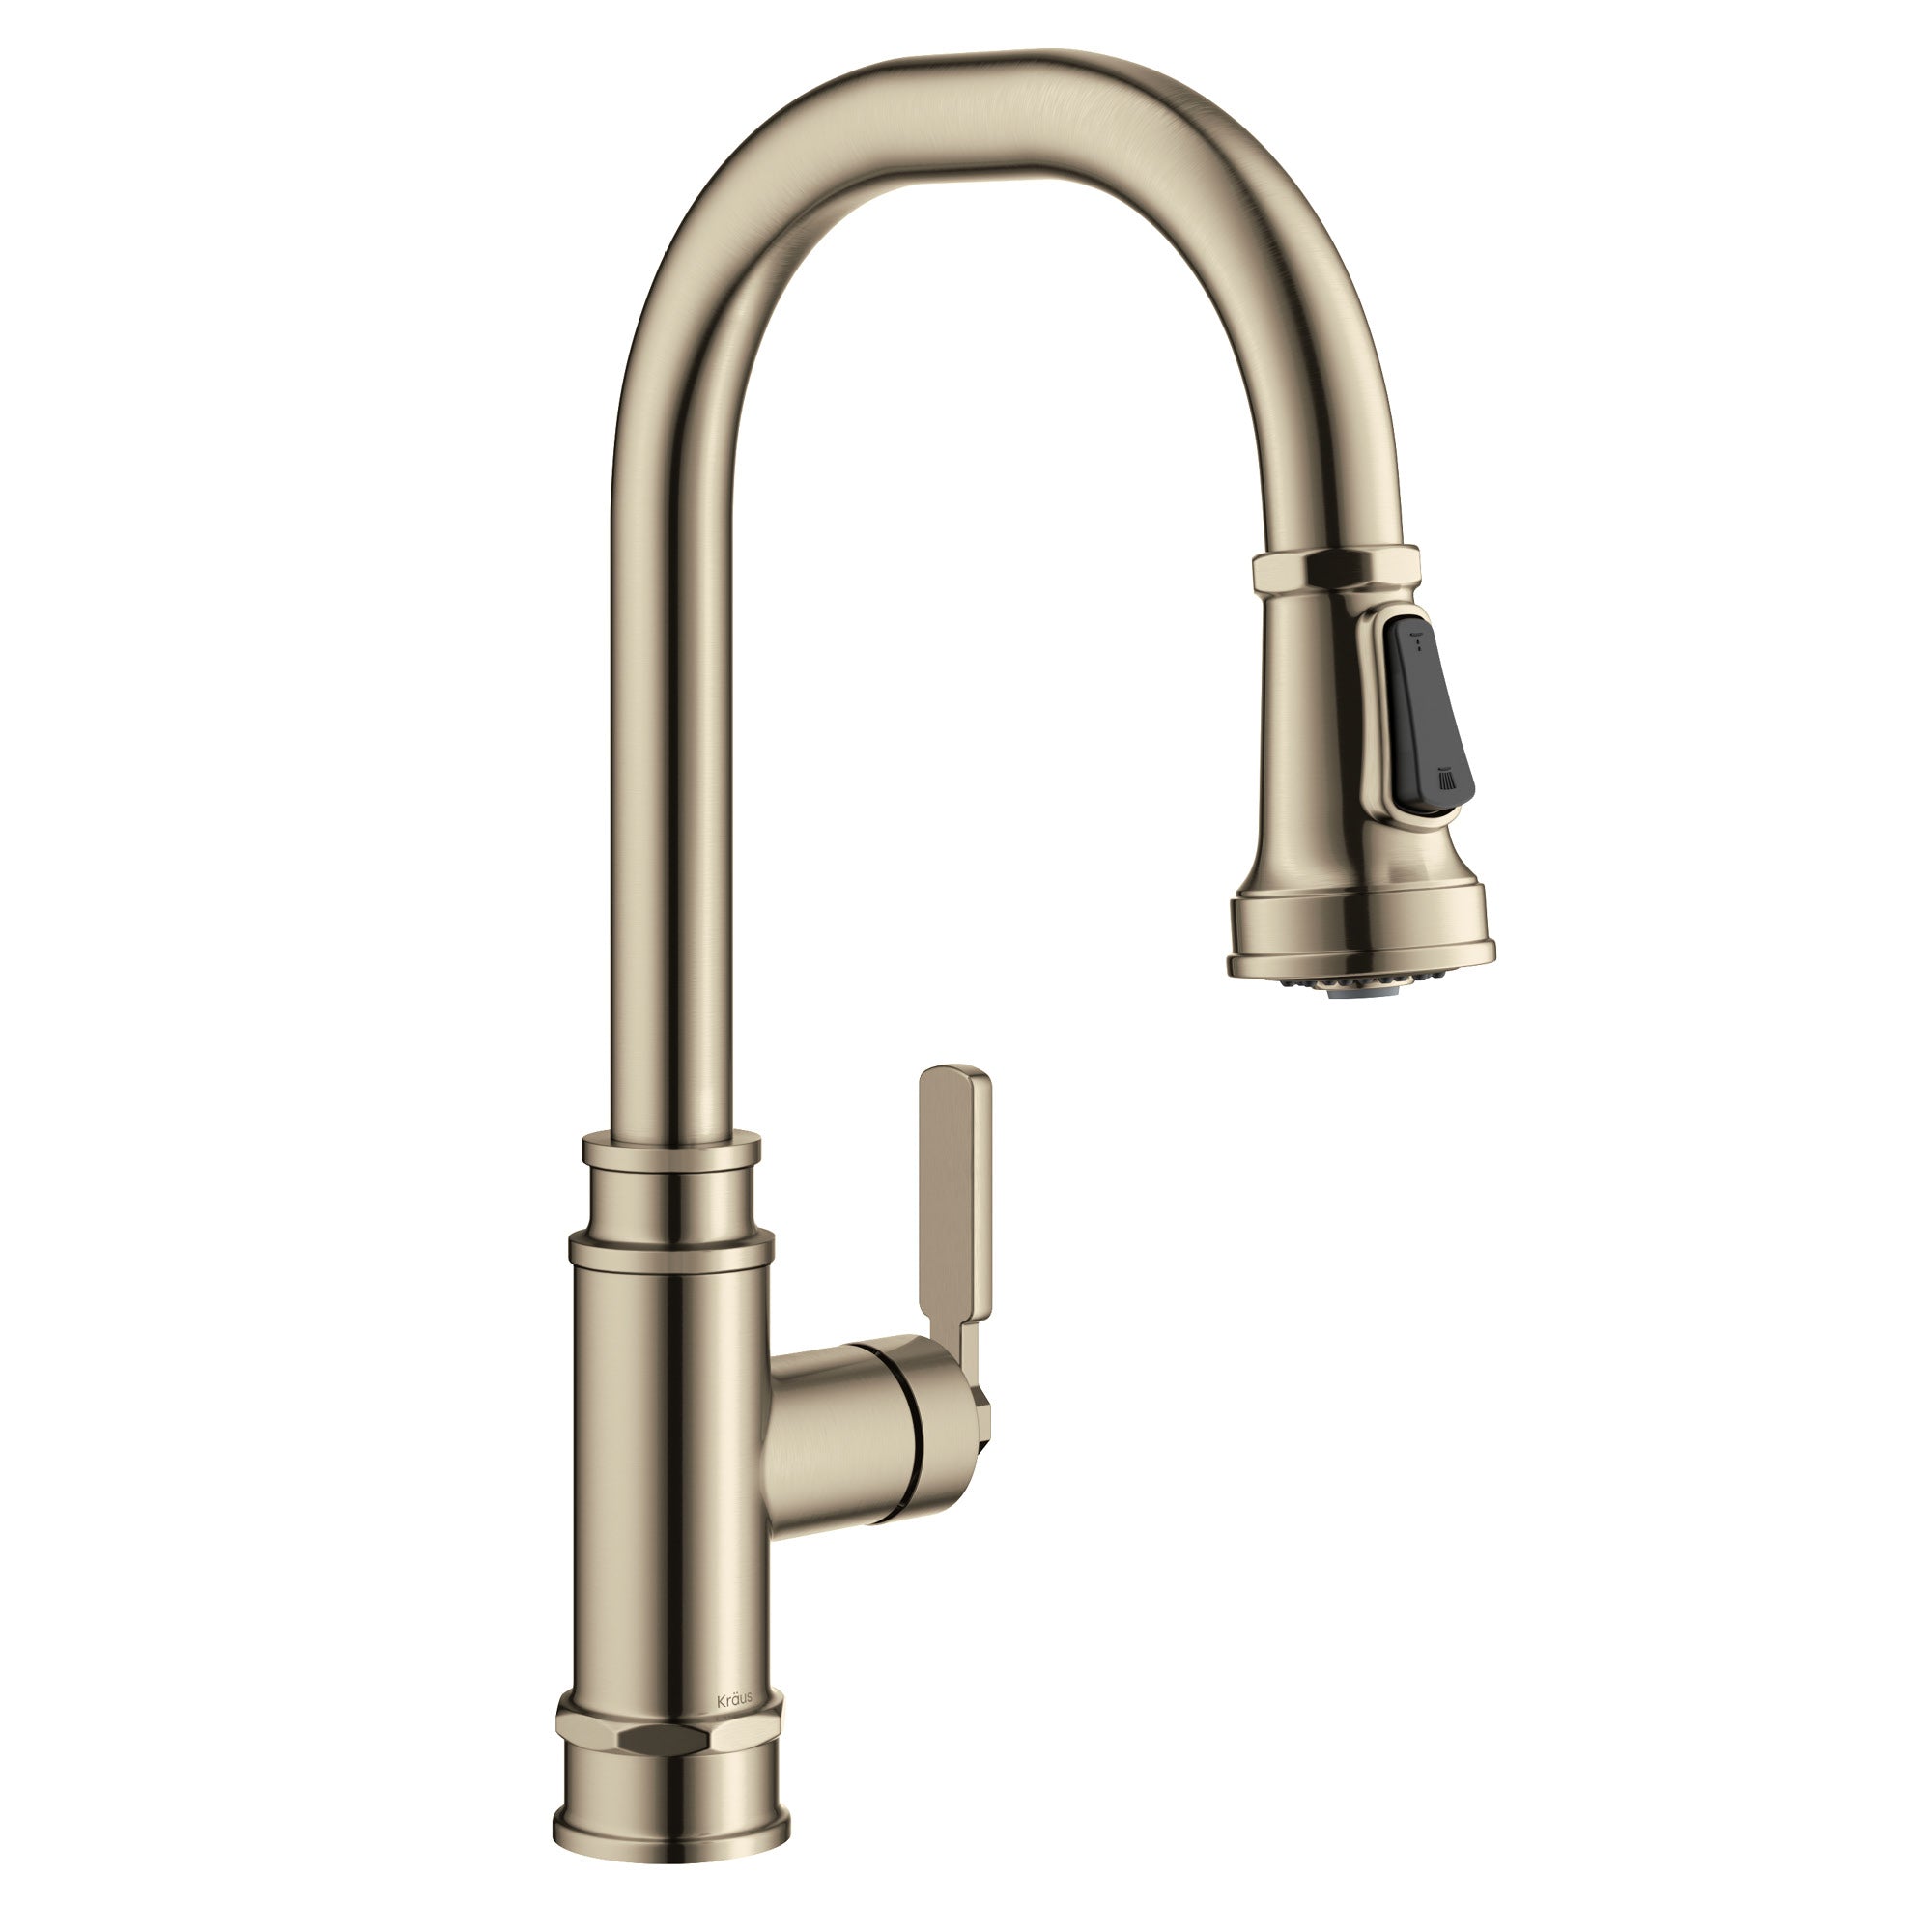 KRAUS Allyn Industrial Pull-Down Kitchen Faucet in Antique Champagne Bronze-Faucets-DirectSinks